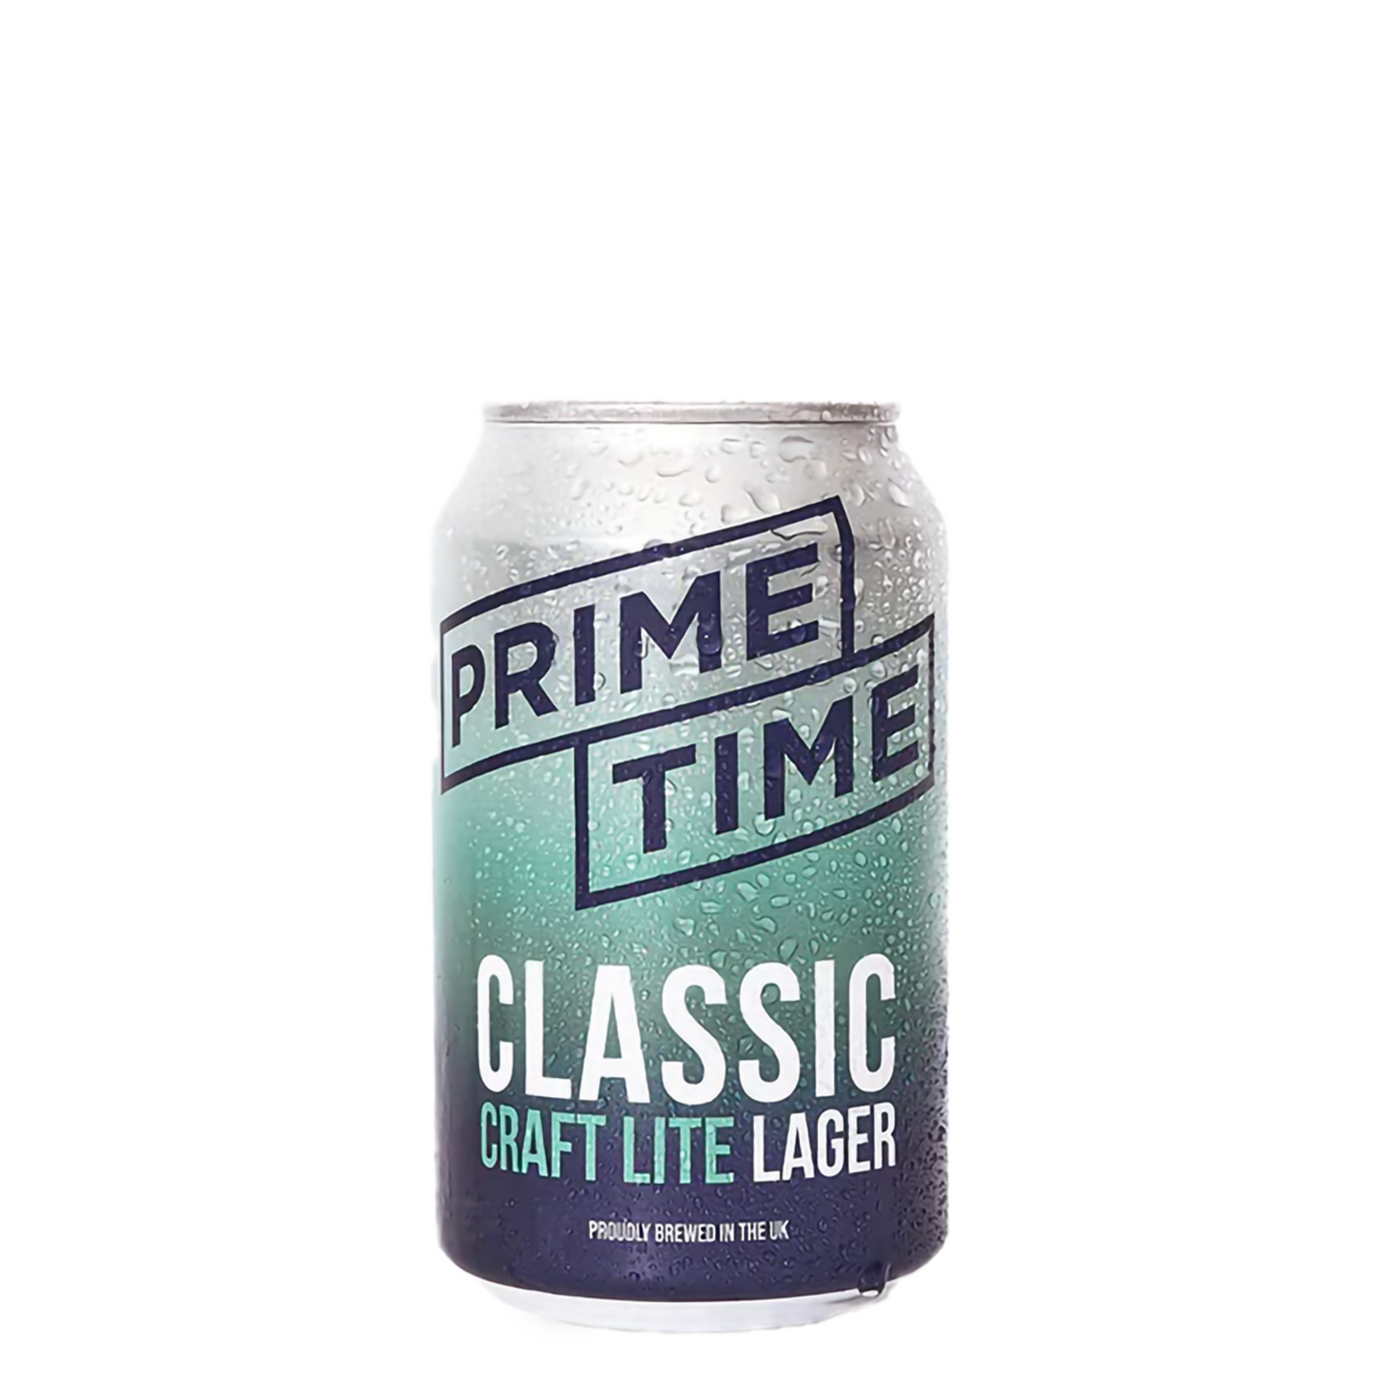 Prime Time Classic Craft Lite Lager 4.2% 330ml Can